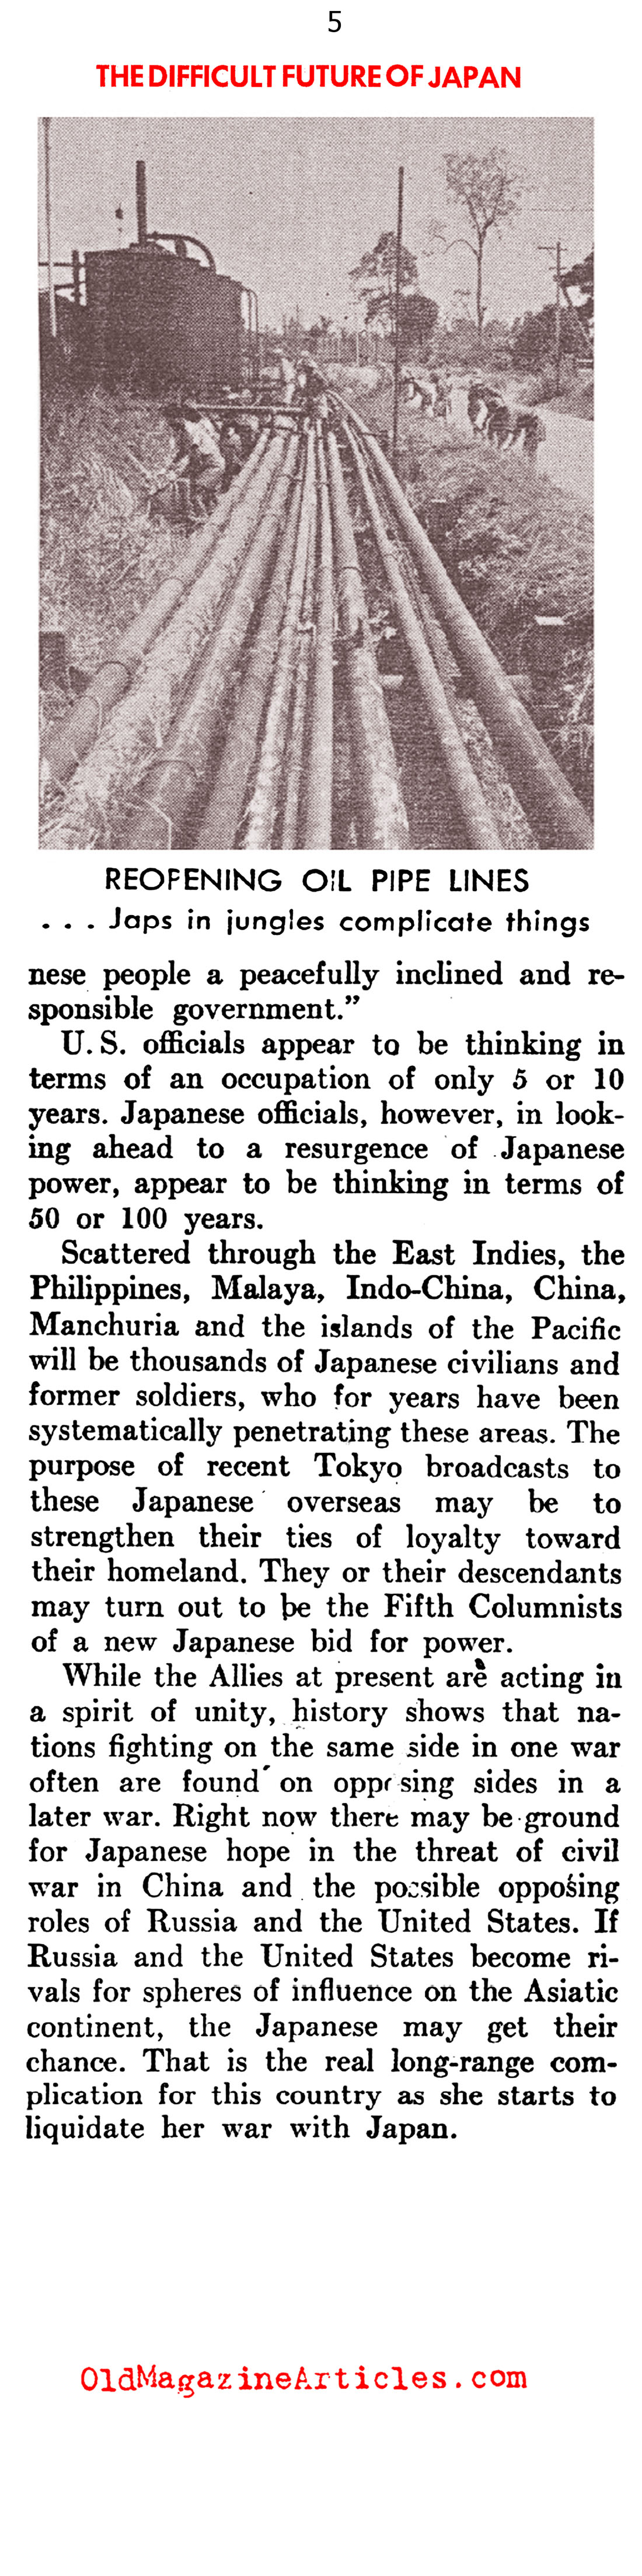 Japan Has Been Beaten. Now What? (United States News, 1945)